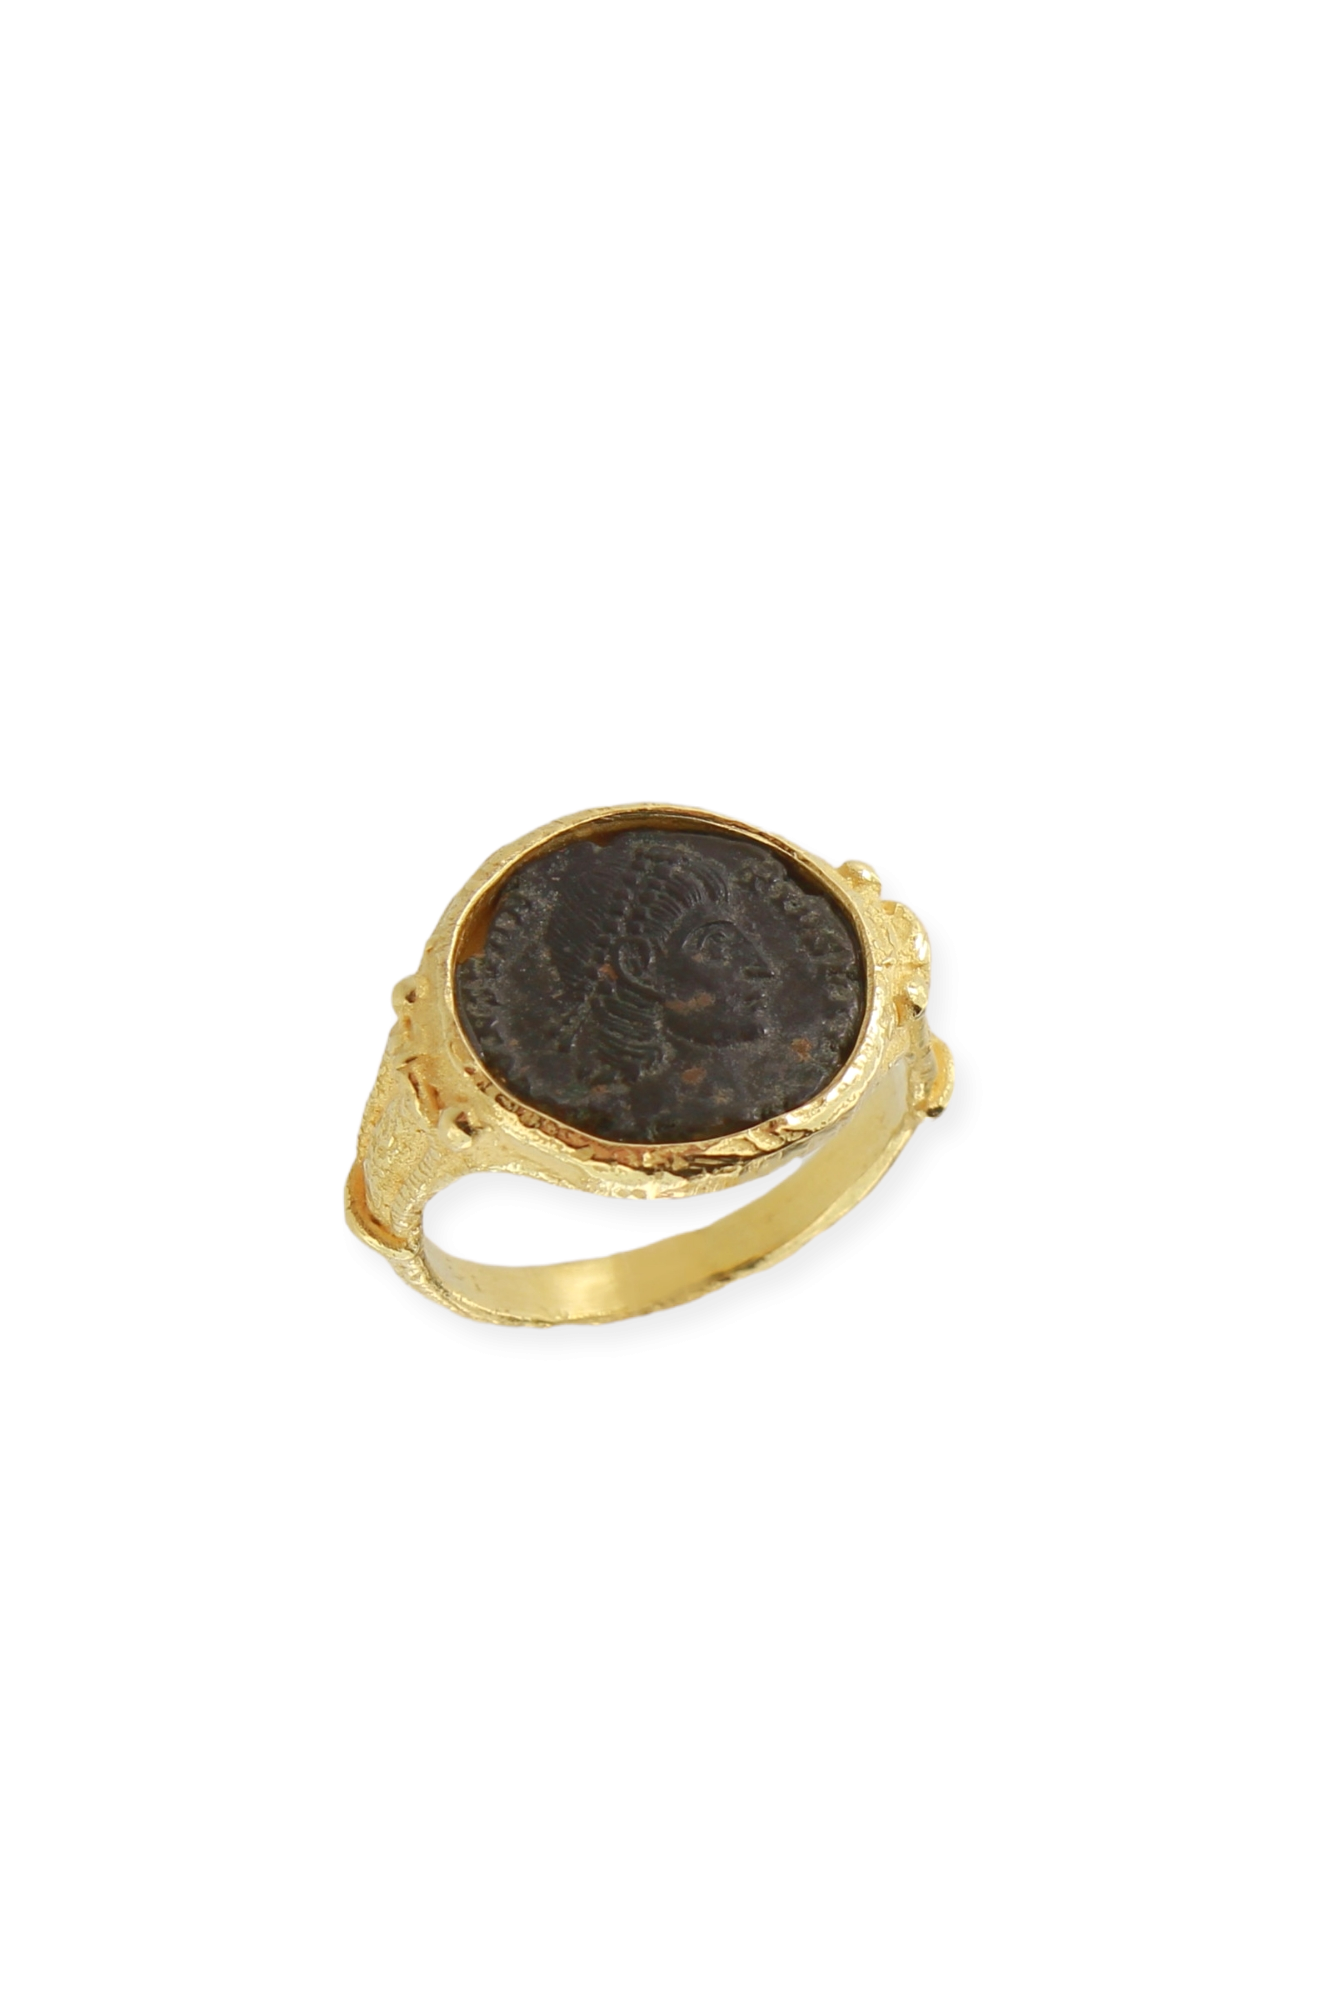 SE605A-18-Kt-Yellow-Gold-Ring-with-Roman-Coin-1